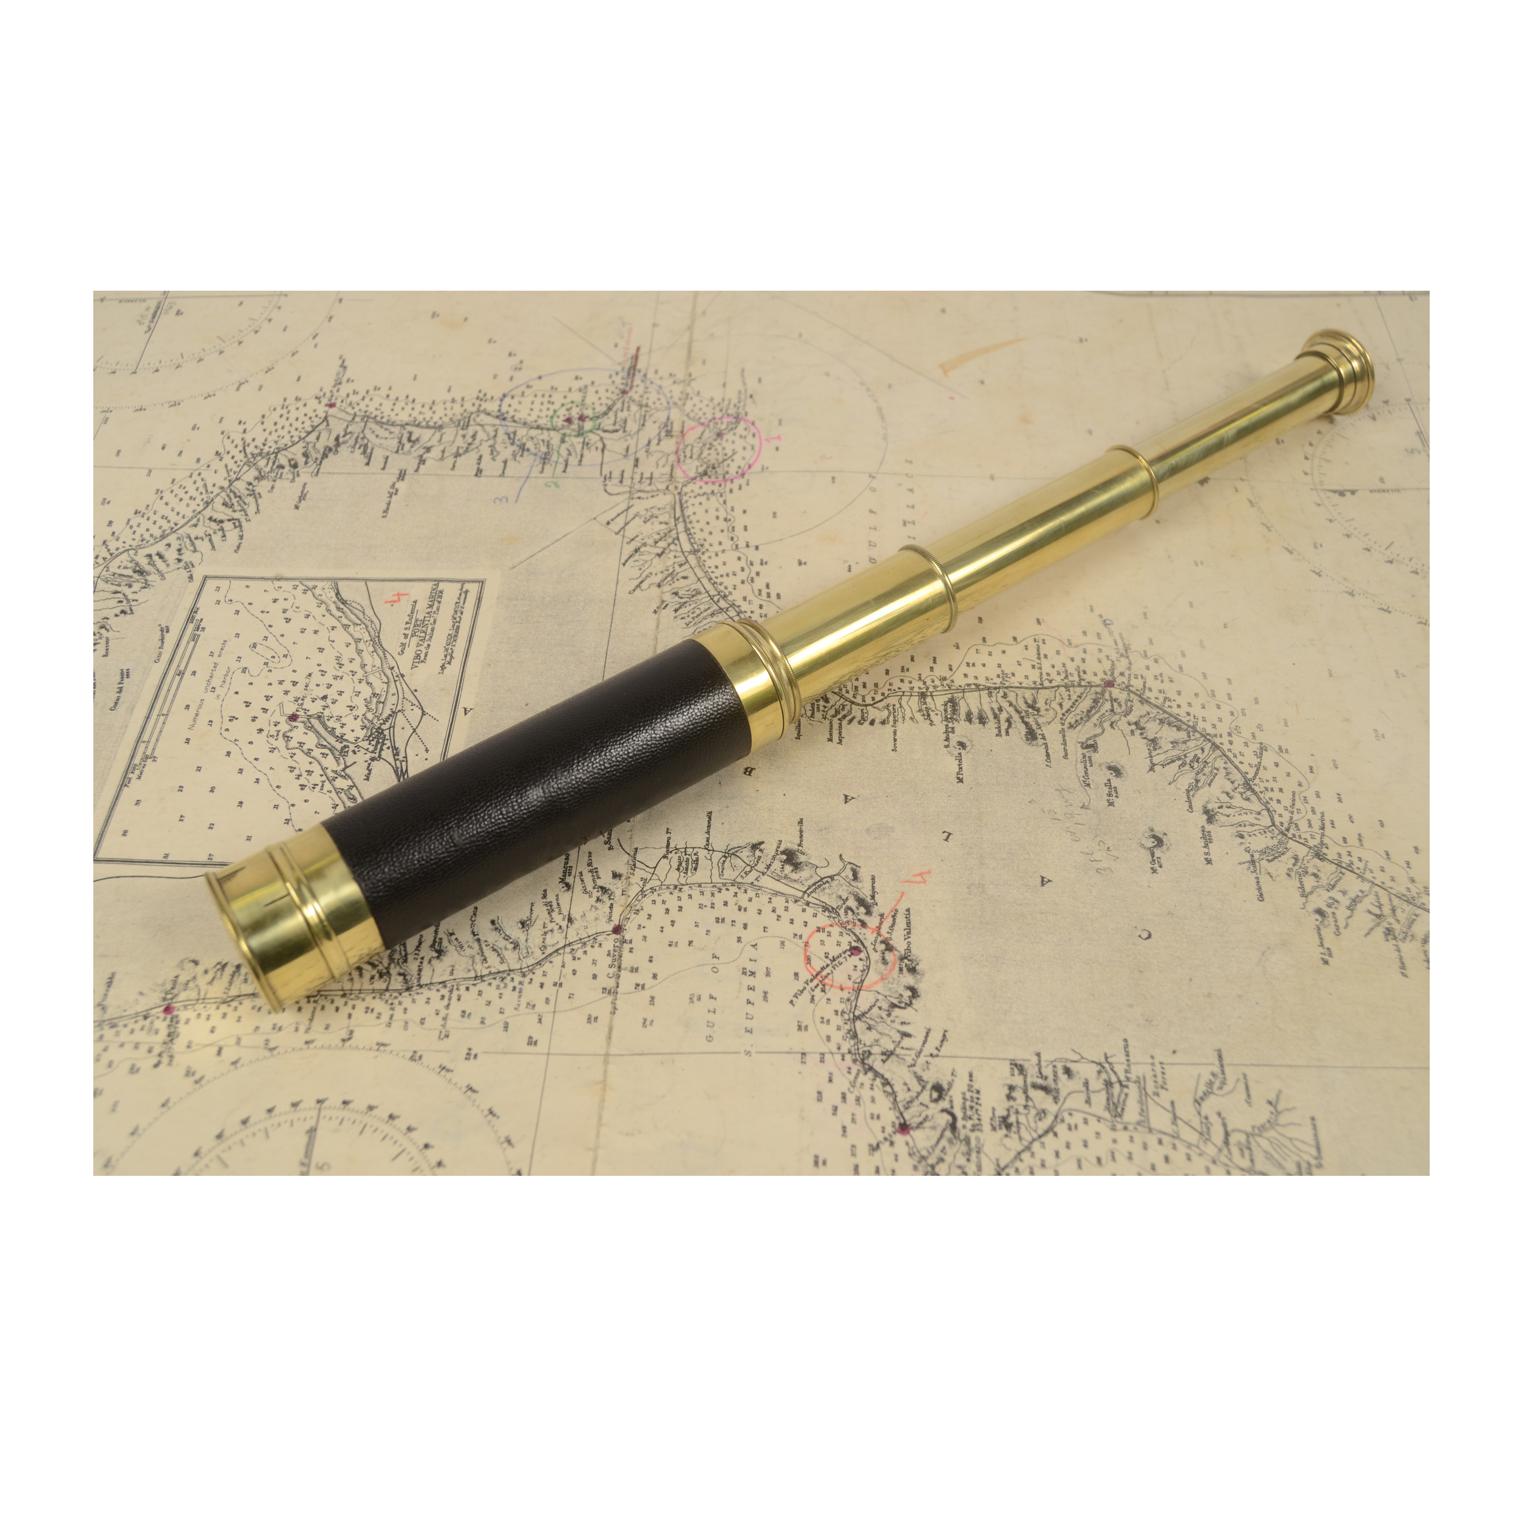 Brass telescope with leather-covered handle French manufacture of the second half of the 19th century.
Focusing with three extensions, complete with tab and no-dust cap. Maximum length 42 cm, minimum 16.5 cm, focal diameter 3 cm.
In excellent